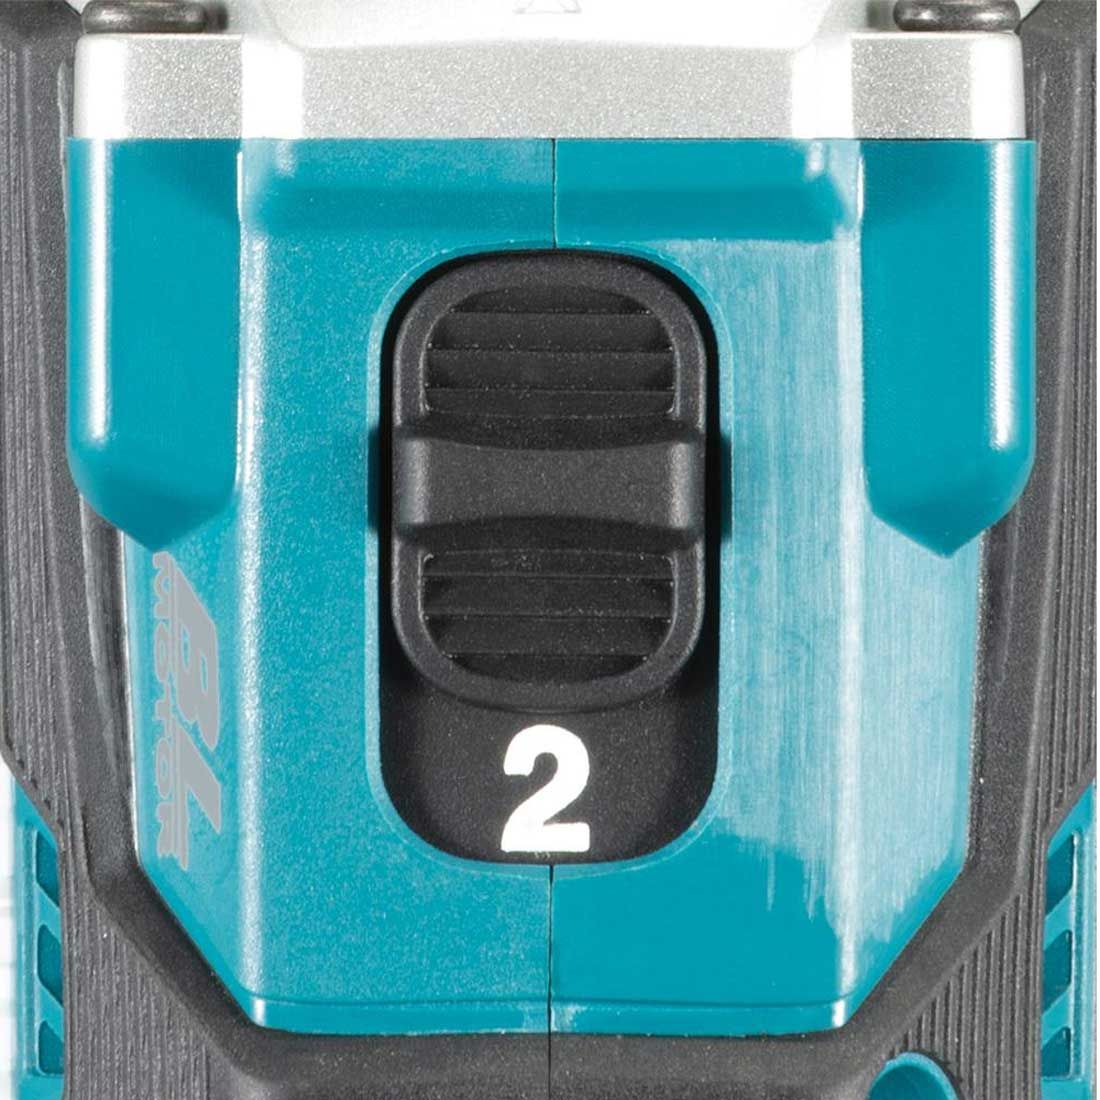 Makita DDF487Z Cordless Brushless Driver Drill 18V LXT® 13mm (1/2″) 40 N·m (350 in.lbs.) (Bare Tool)